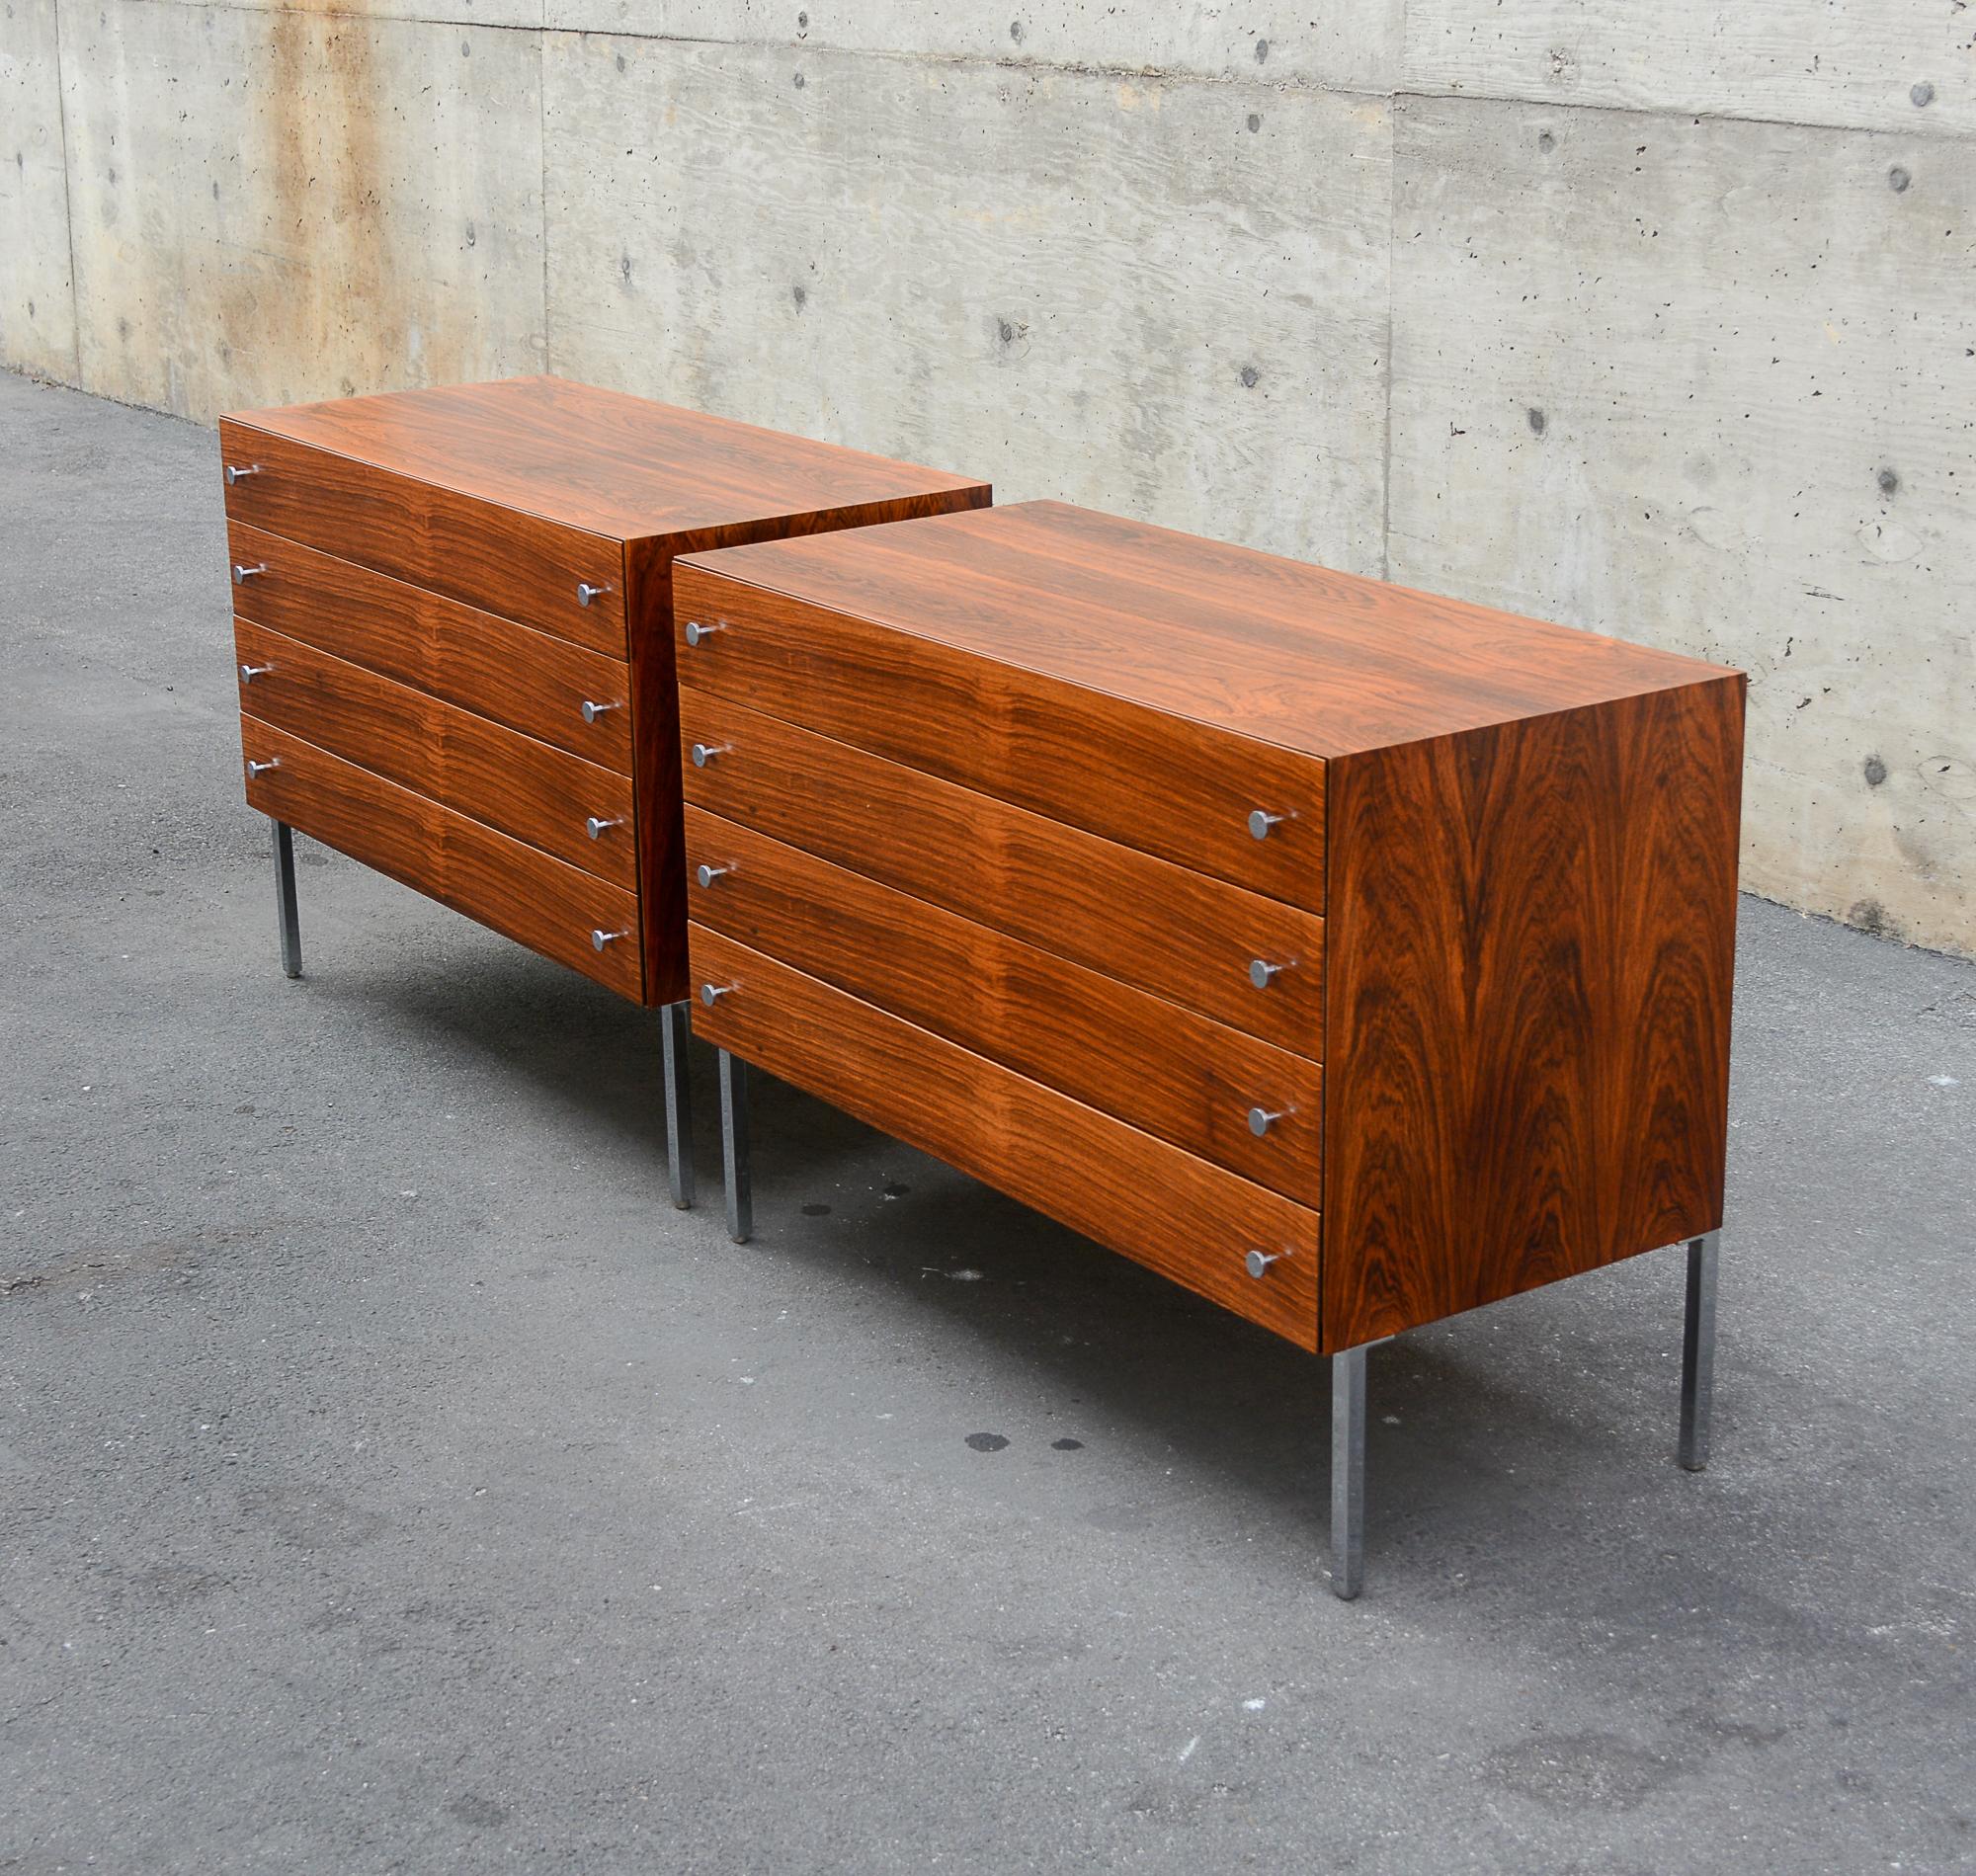 Pair of Rosewood Chests by Poul Norreklit for Sigurd Hansen In Good Condition For Sale In San Mateo, CA